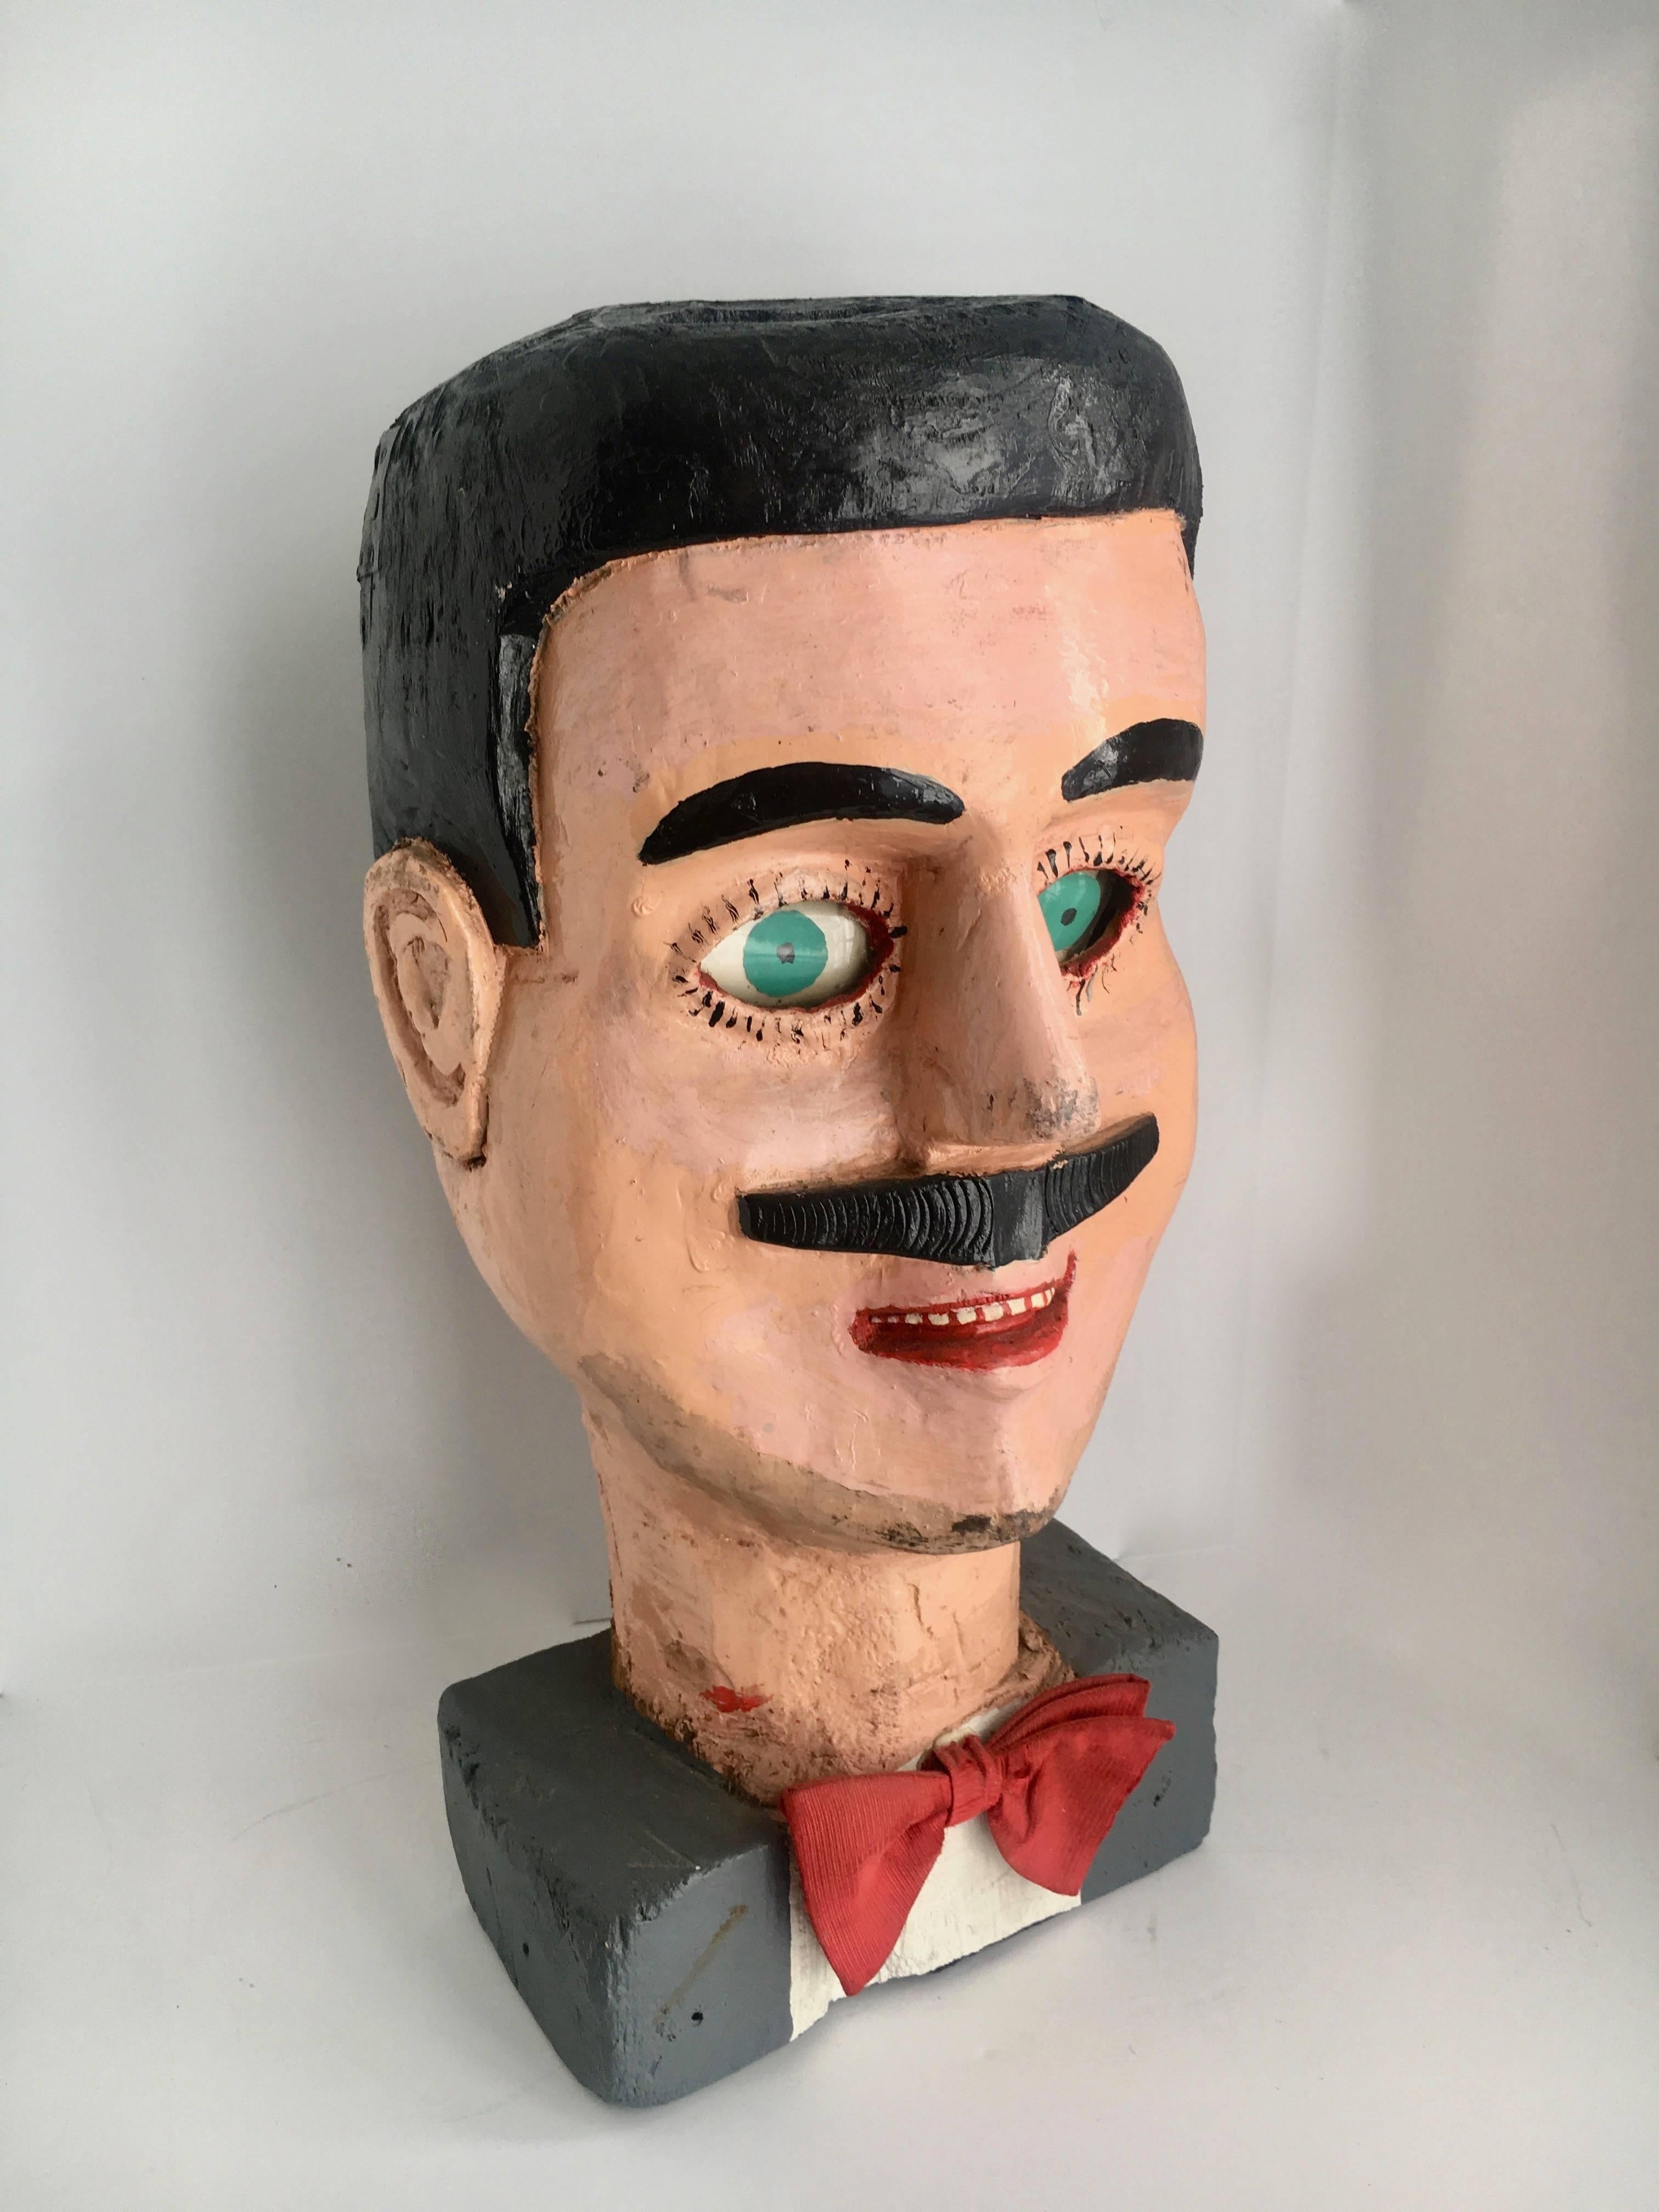 Mexican Folk Art head sculpture - a large and very animated sculpture - bound to be a conversation piece.
    